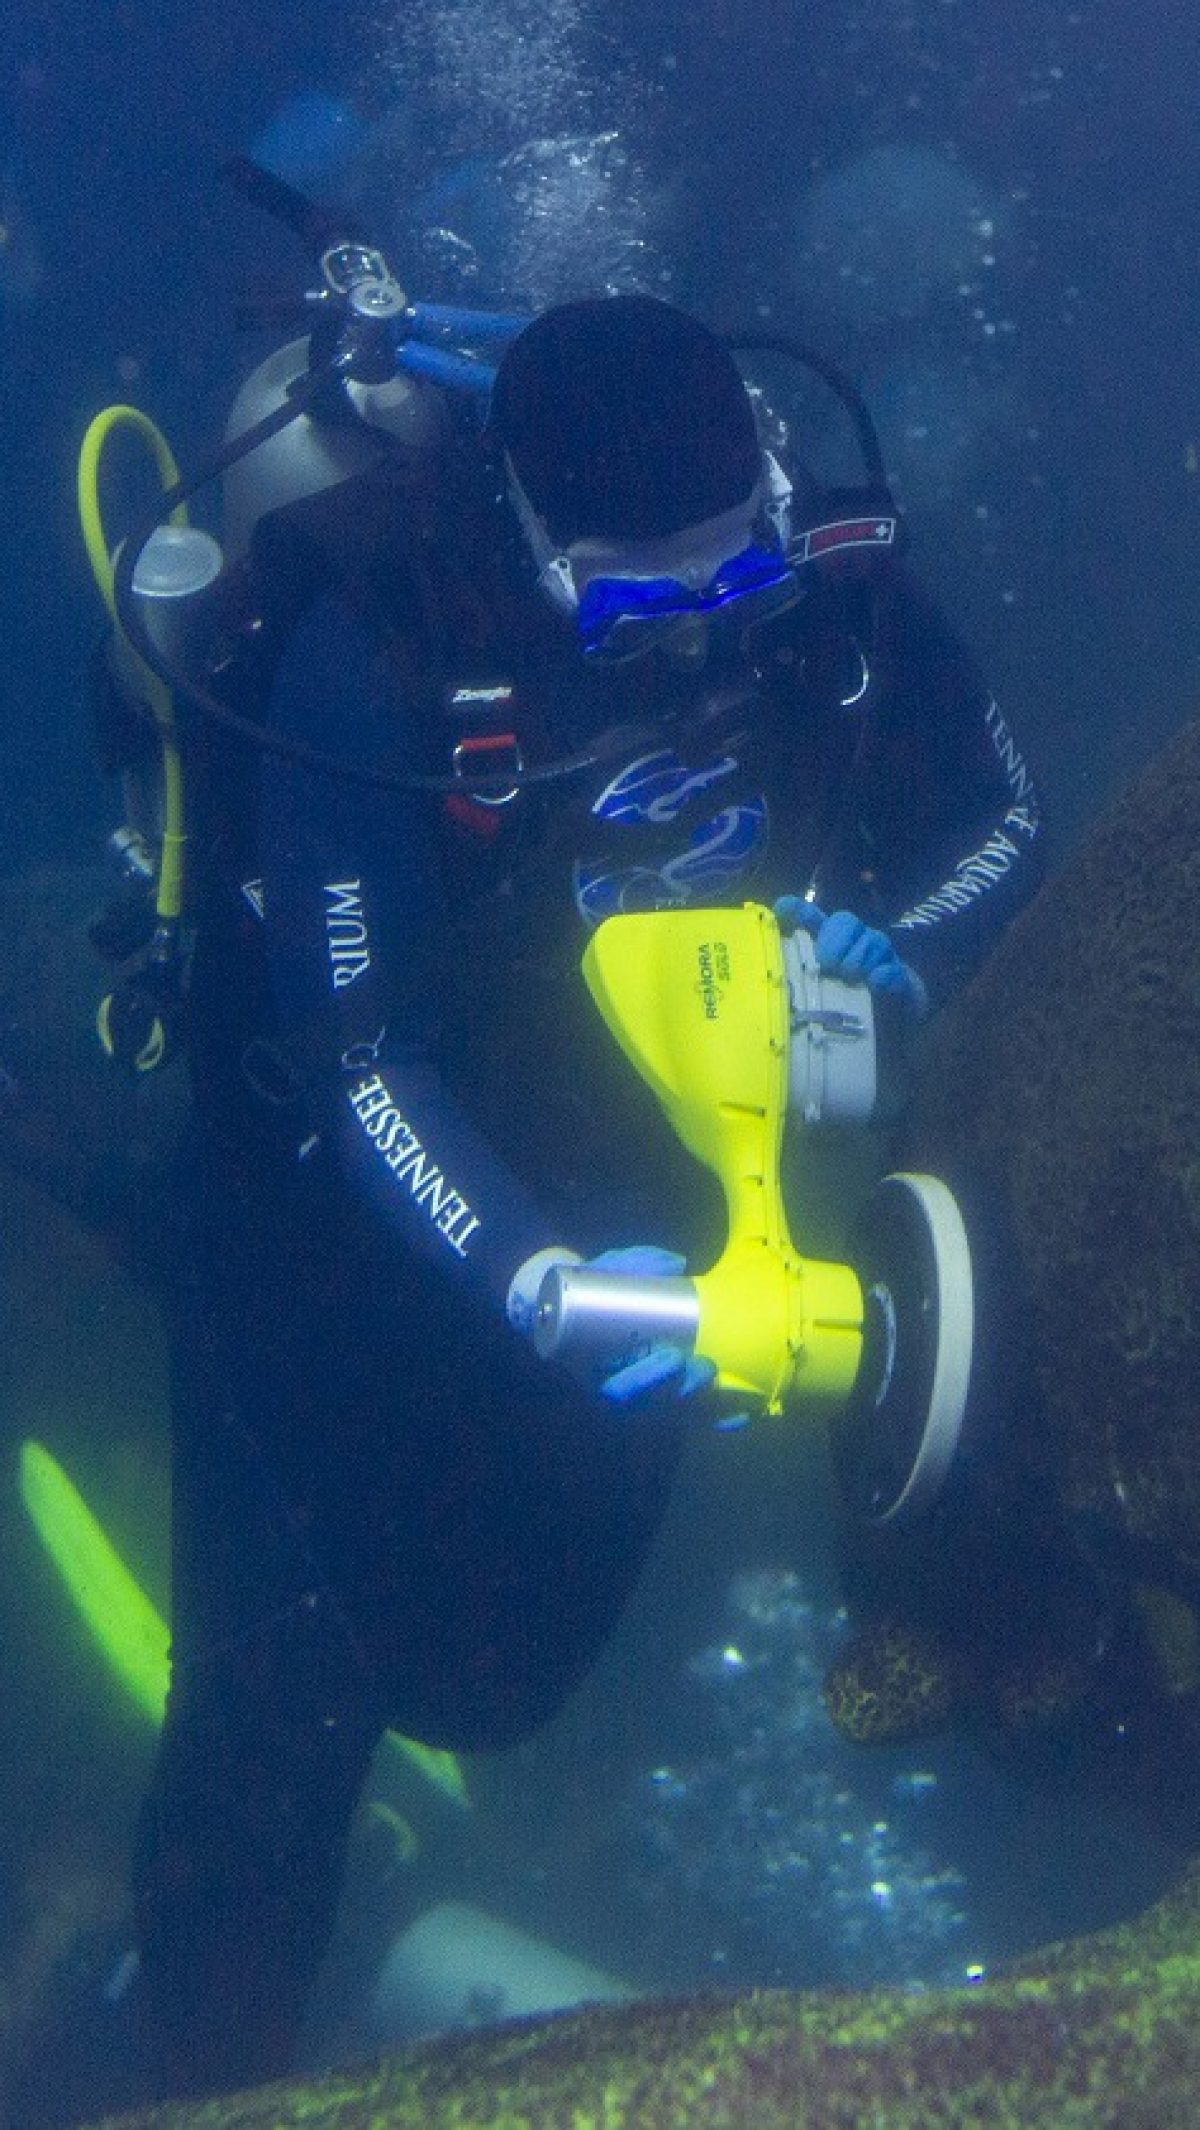 A volunteer diver uses a powered scrubber to scour decorative rock work inside the Secret Reef exhibit